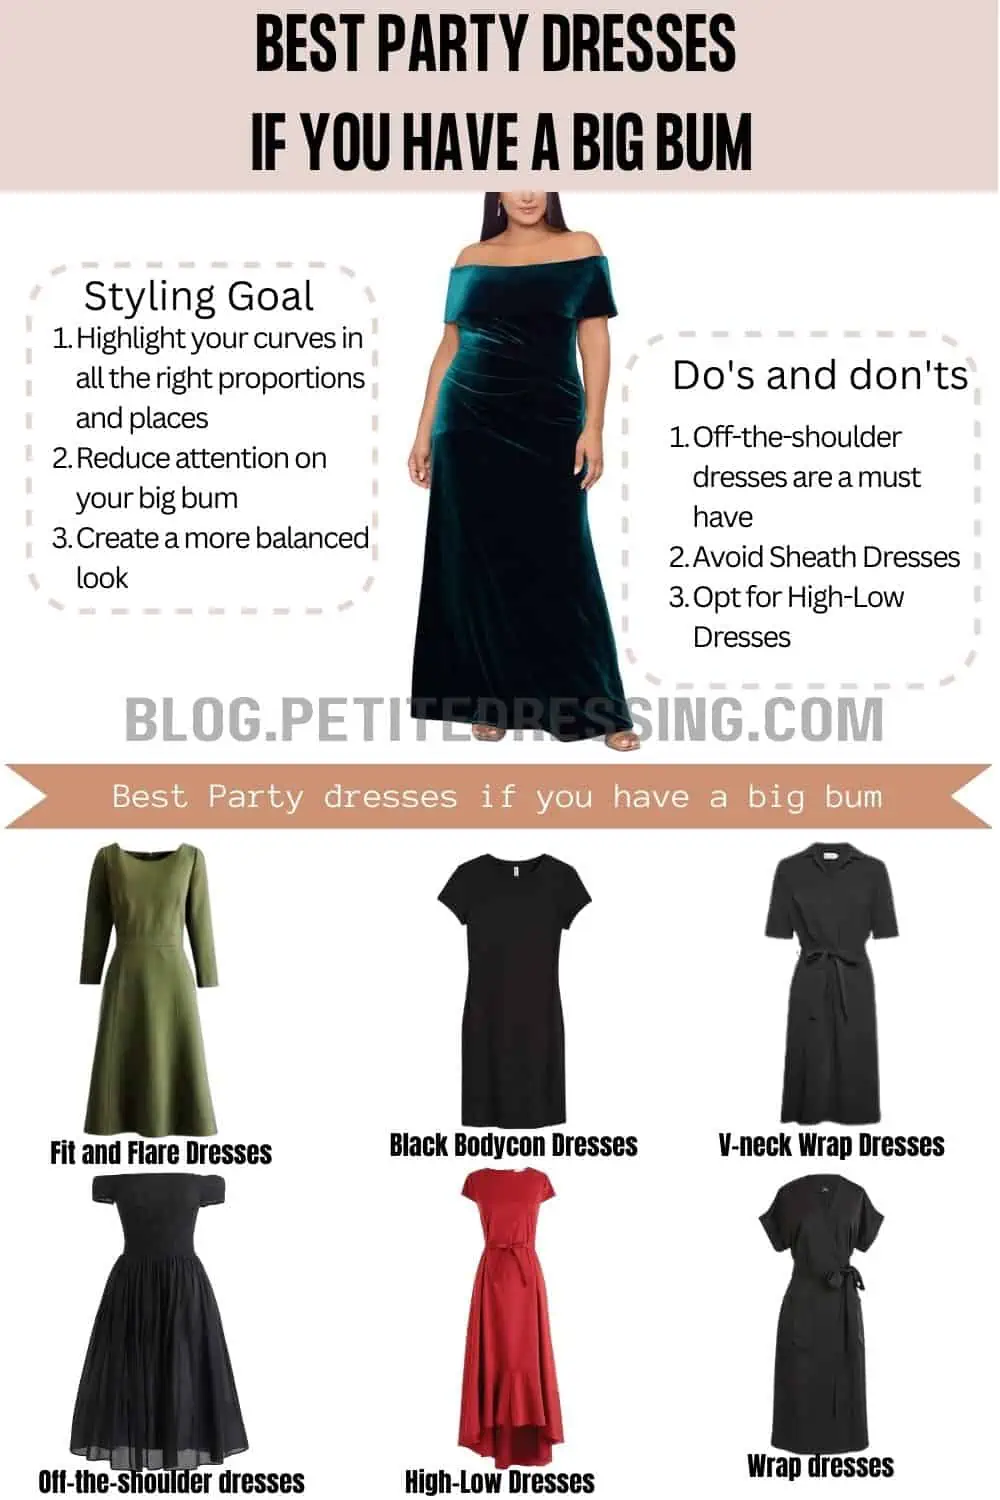 Party dresses guide if you have a big bum - Petite Dressing